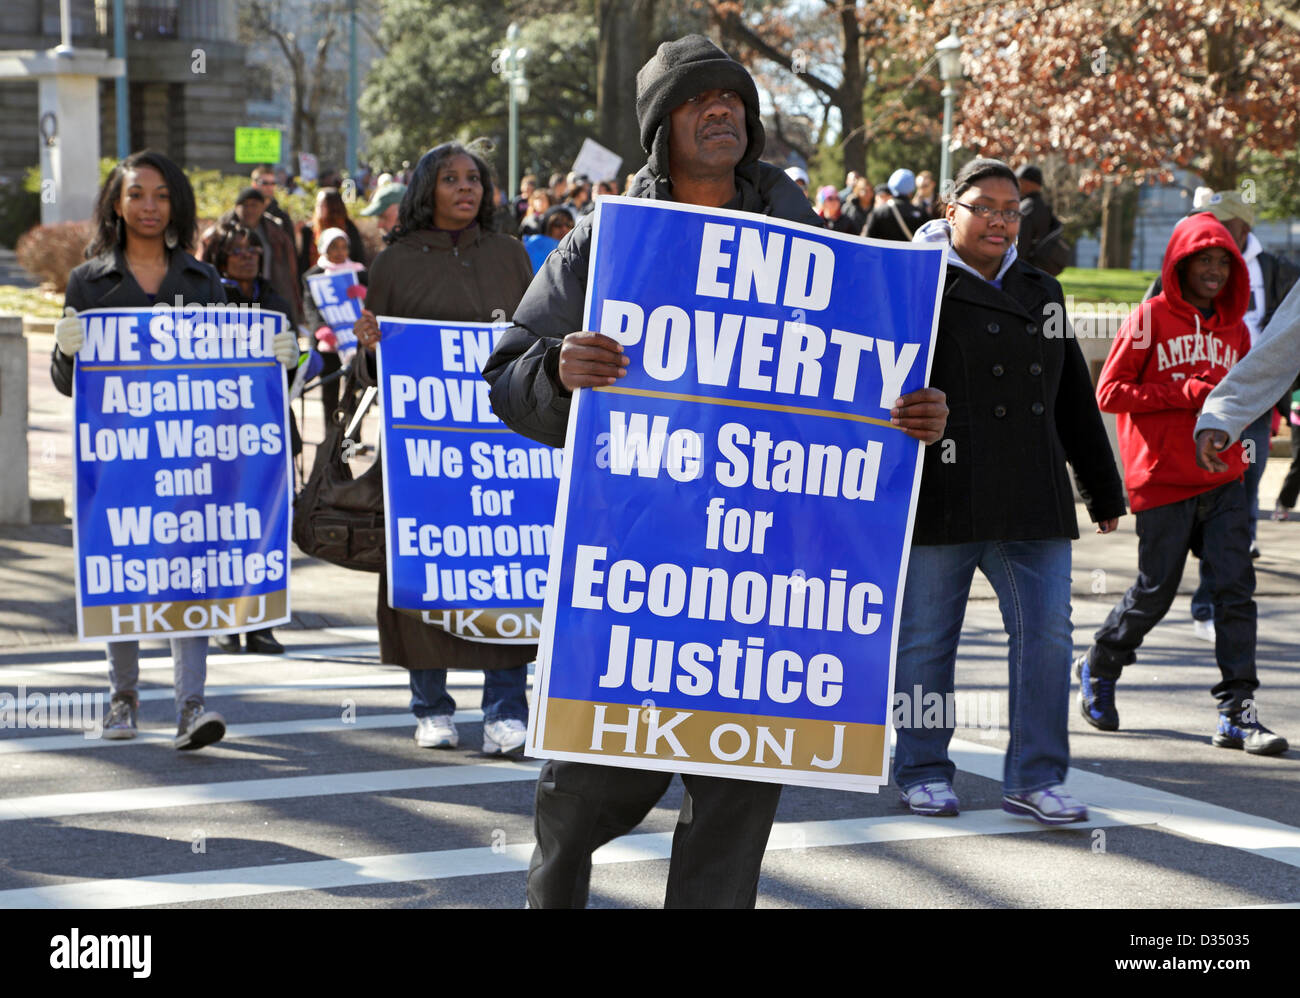 Raleigh, North Carolina, USA, February 9, 2013: Seventh 'Historic Thousands on Jones Street' (HKonJ7) demonstration for 'Mobilizing to end poverty and economic injustice'. Stock Photo